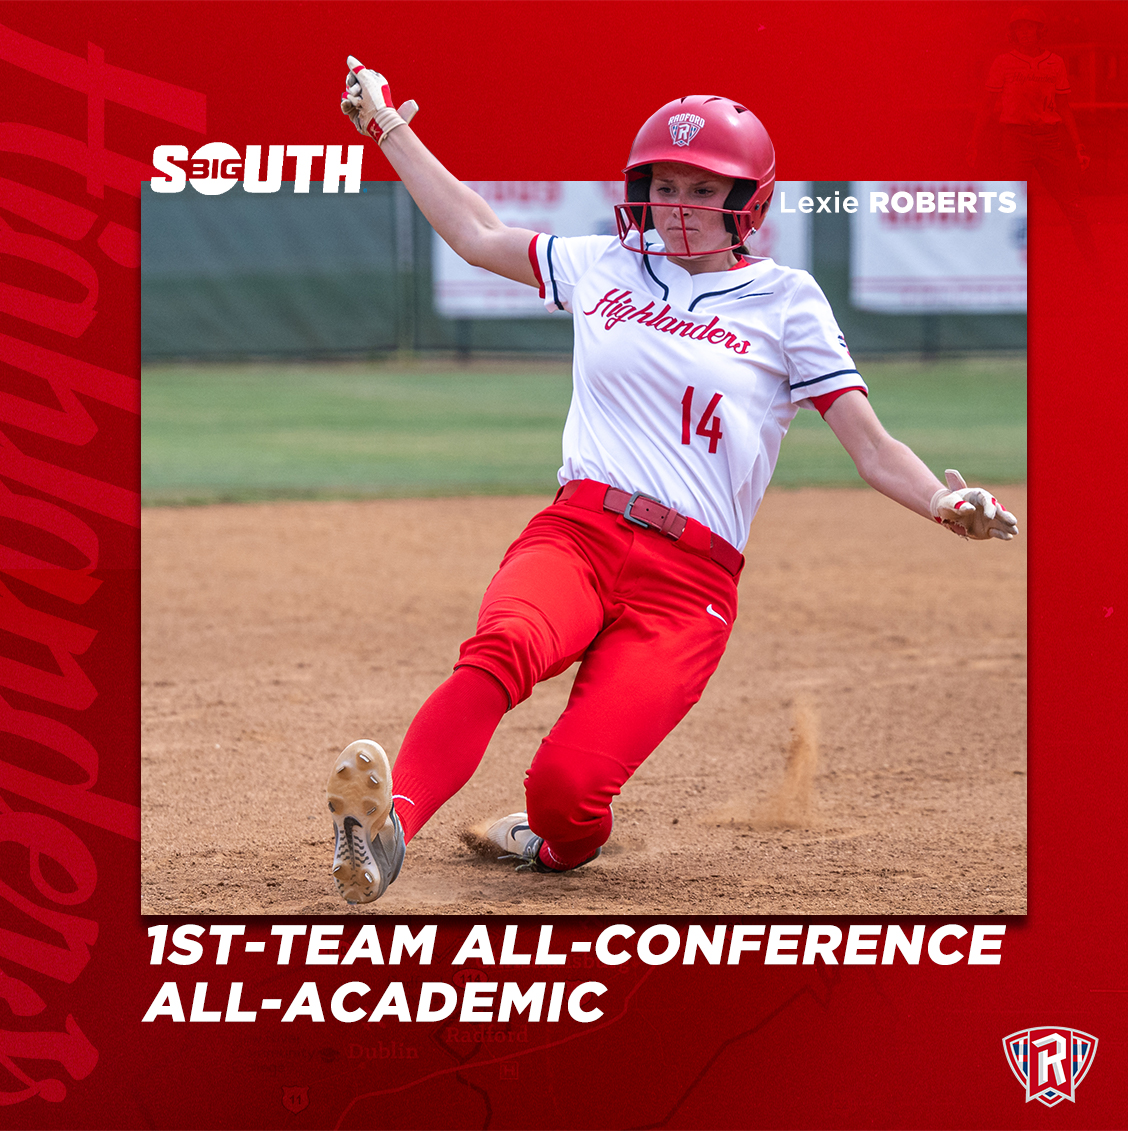 Lexie has also been named to the first team all-conference and all-academic lists! #RiseAndDefend